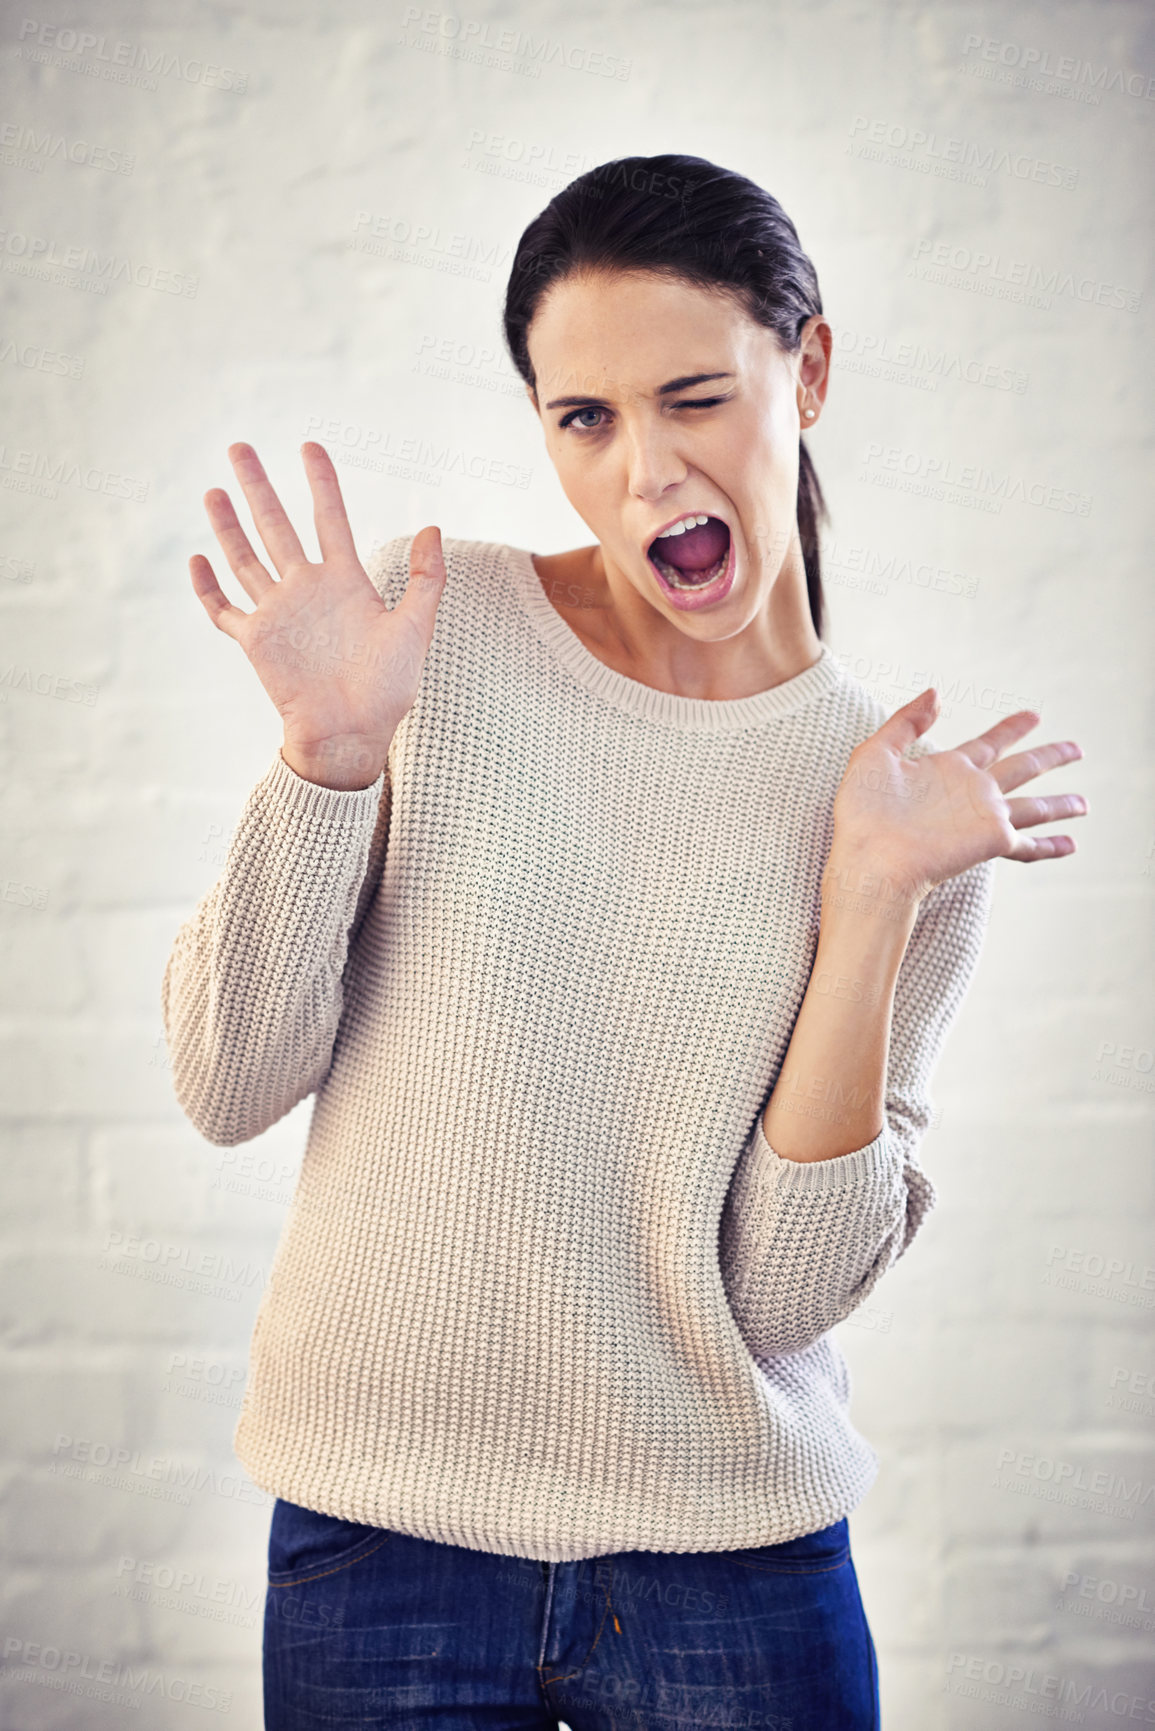 Buy stock photo Shot of a young woman with her hands in the air looking surprised